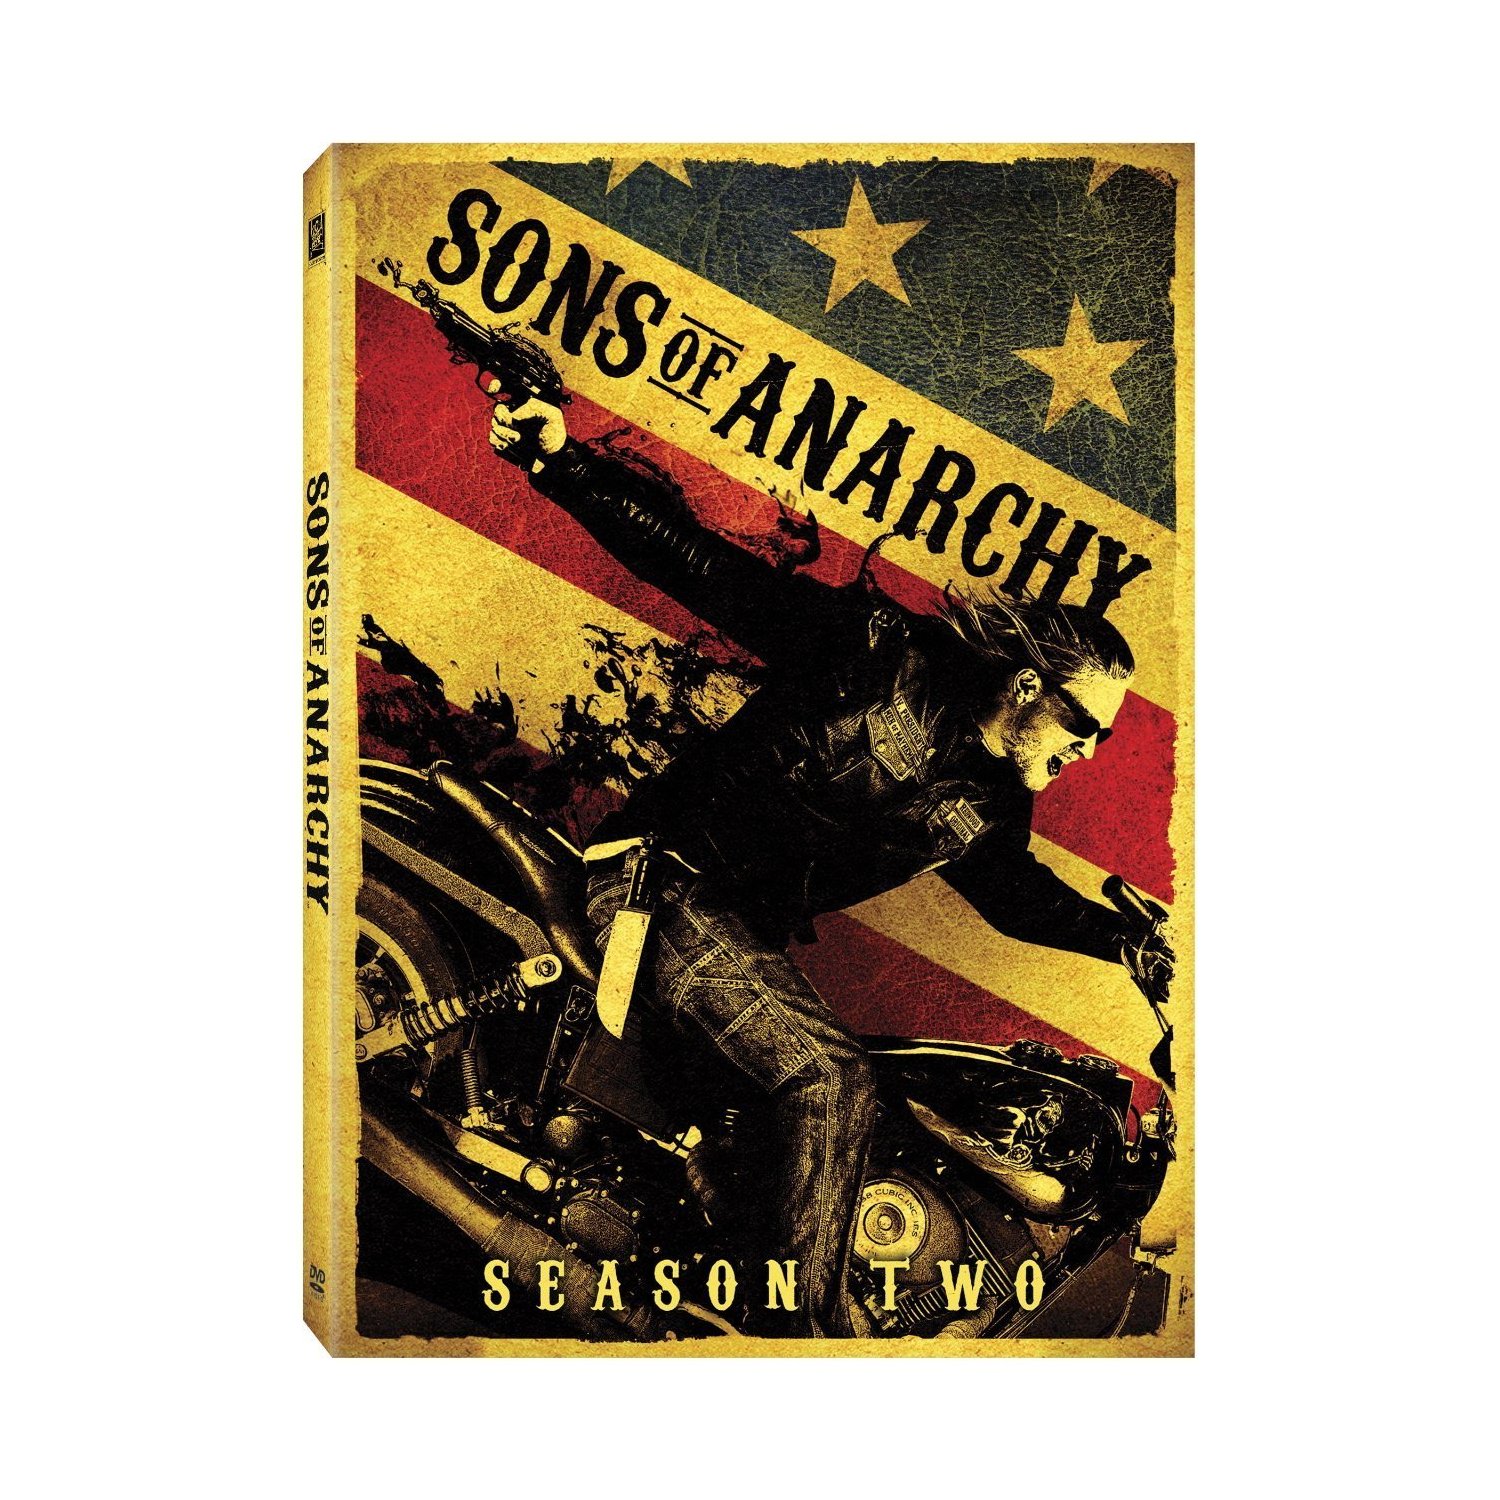 Sons of Anarchy Season 2 Disk 1